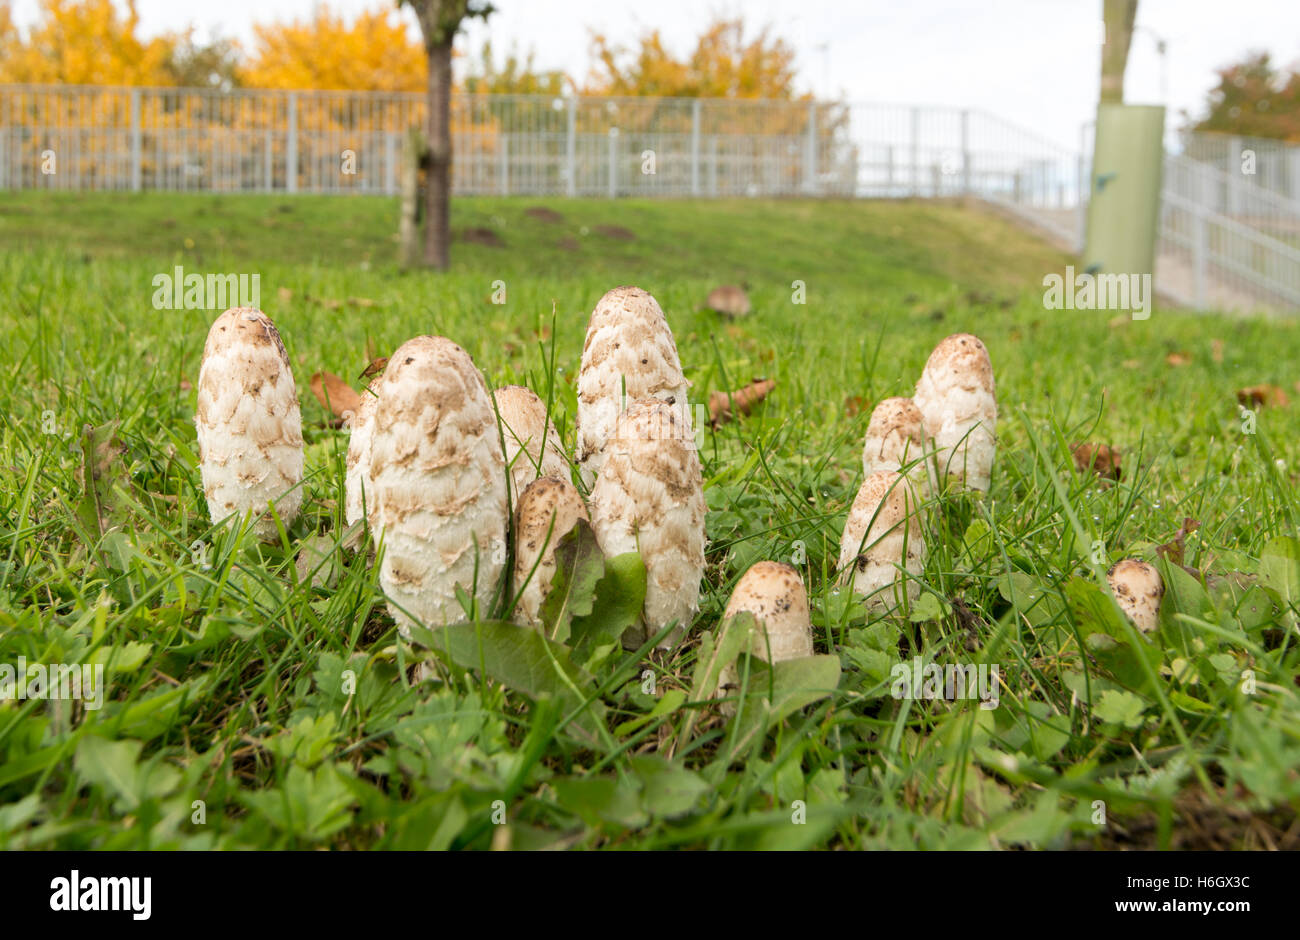 Shaggy Ink Cap mushrooms are a common site in gardens and parks in late summer and early autumn in the UK. Stock Photo